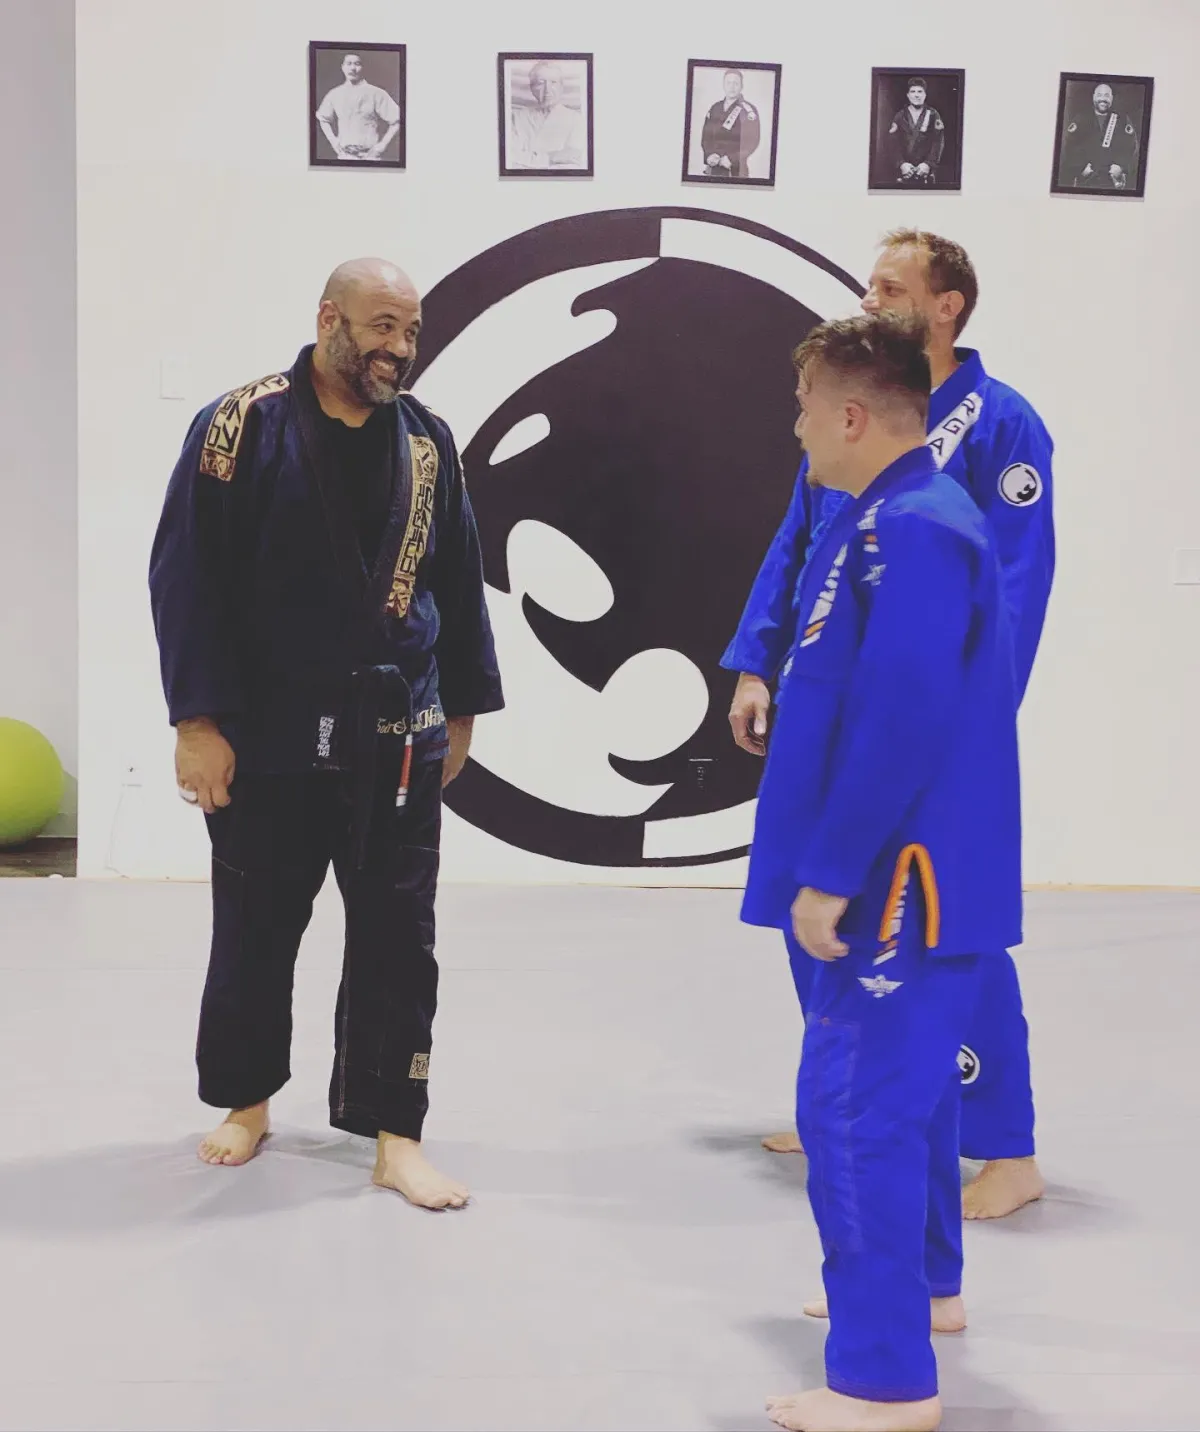 Head coach of the Renzo Gracie Jiu-Jitsu Academy of Lake Worth, Santos Caban, greeting two adult male students in the gym after a class. Caban is dressed in jiu-jitsu clothing and is shaking hands with the students, who are also wearing traditional jiu-jitsu uniforms (gi). The gym is spacious and brightly lit, with mats covering the floor and motivational posters and banners on the walls. The atmosphere is friendly and welcoming, as the coach and students exchange pleasantries and discuss their training session.